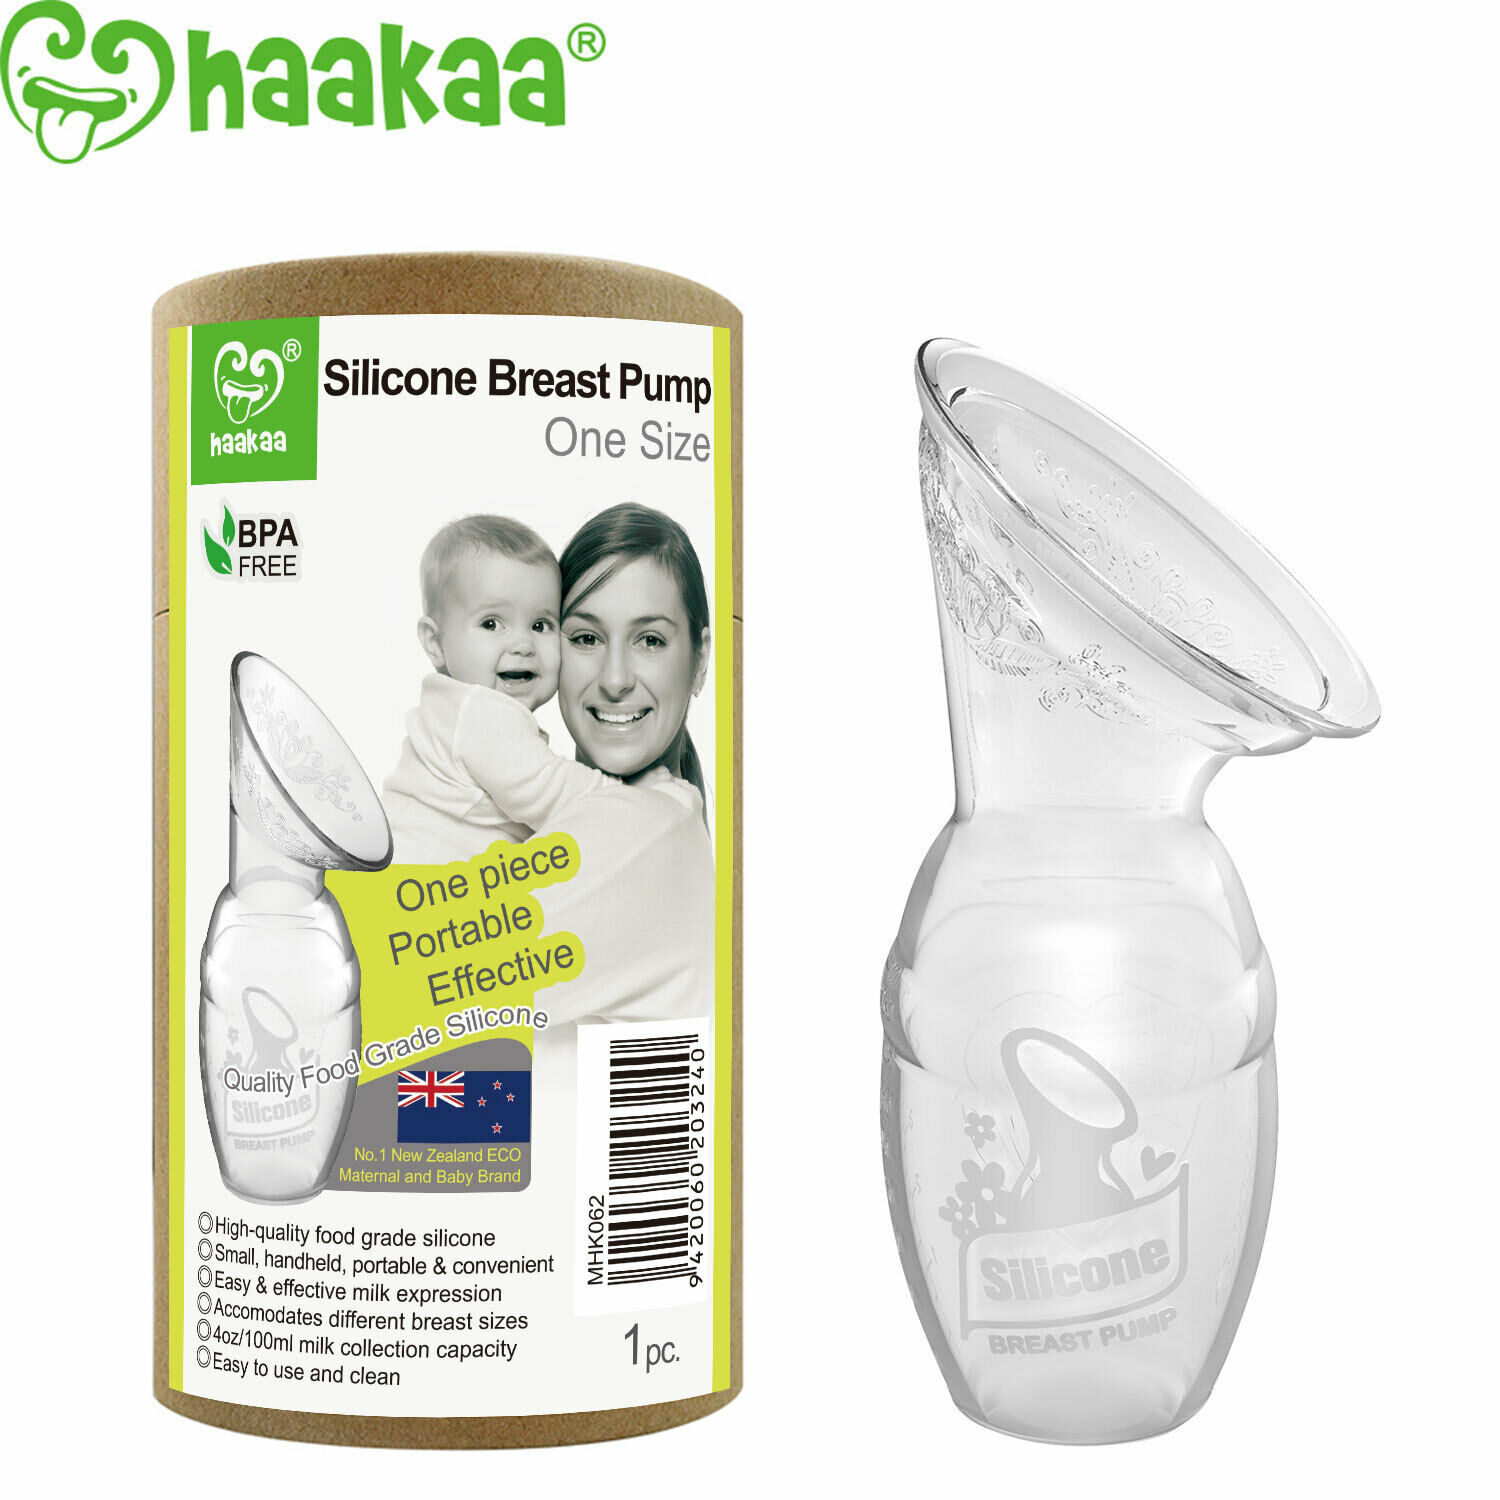 Haakaa Manual Silicone Breast Pump 4 Oz, 2019 Model, Sold By Distributor